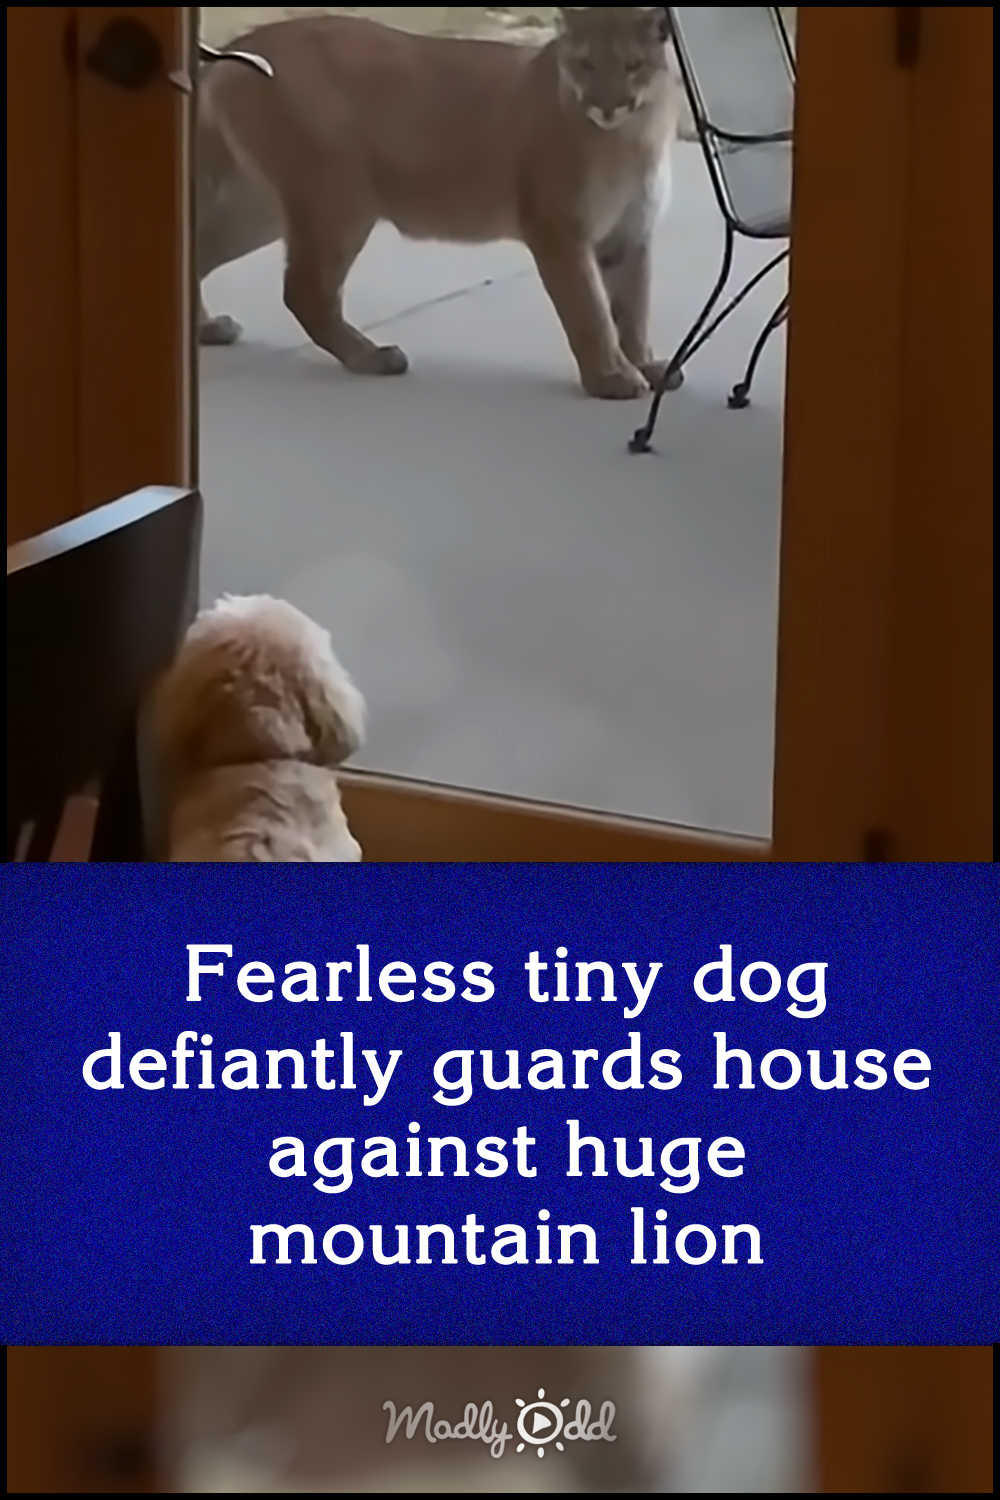 Fearless tiny dog defiantly guards house against huge mountain lion